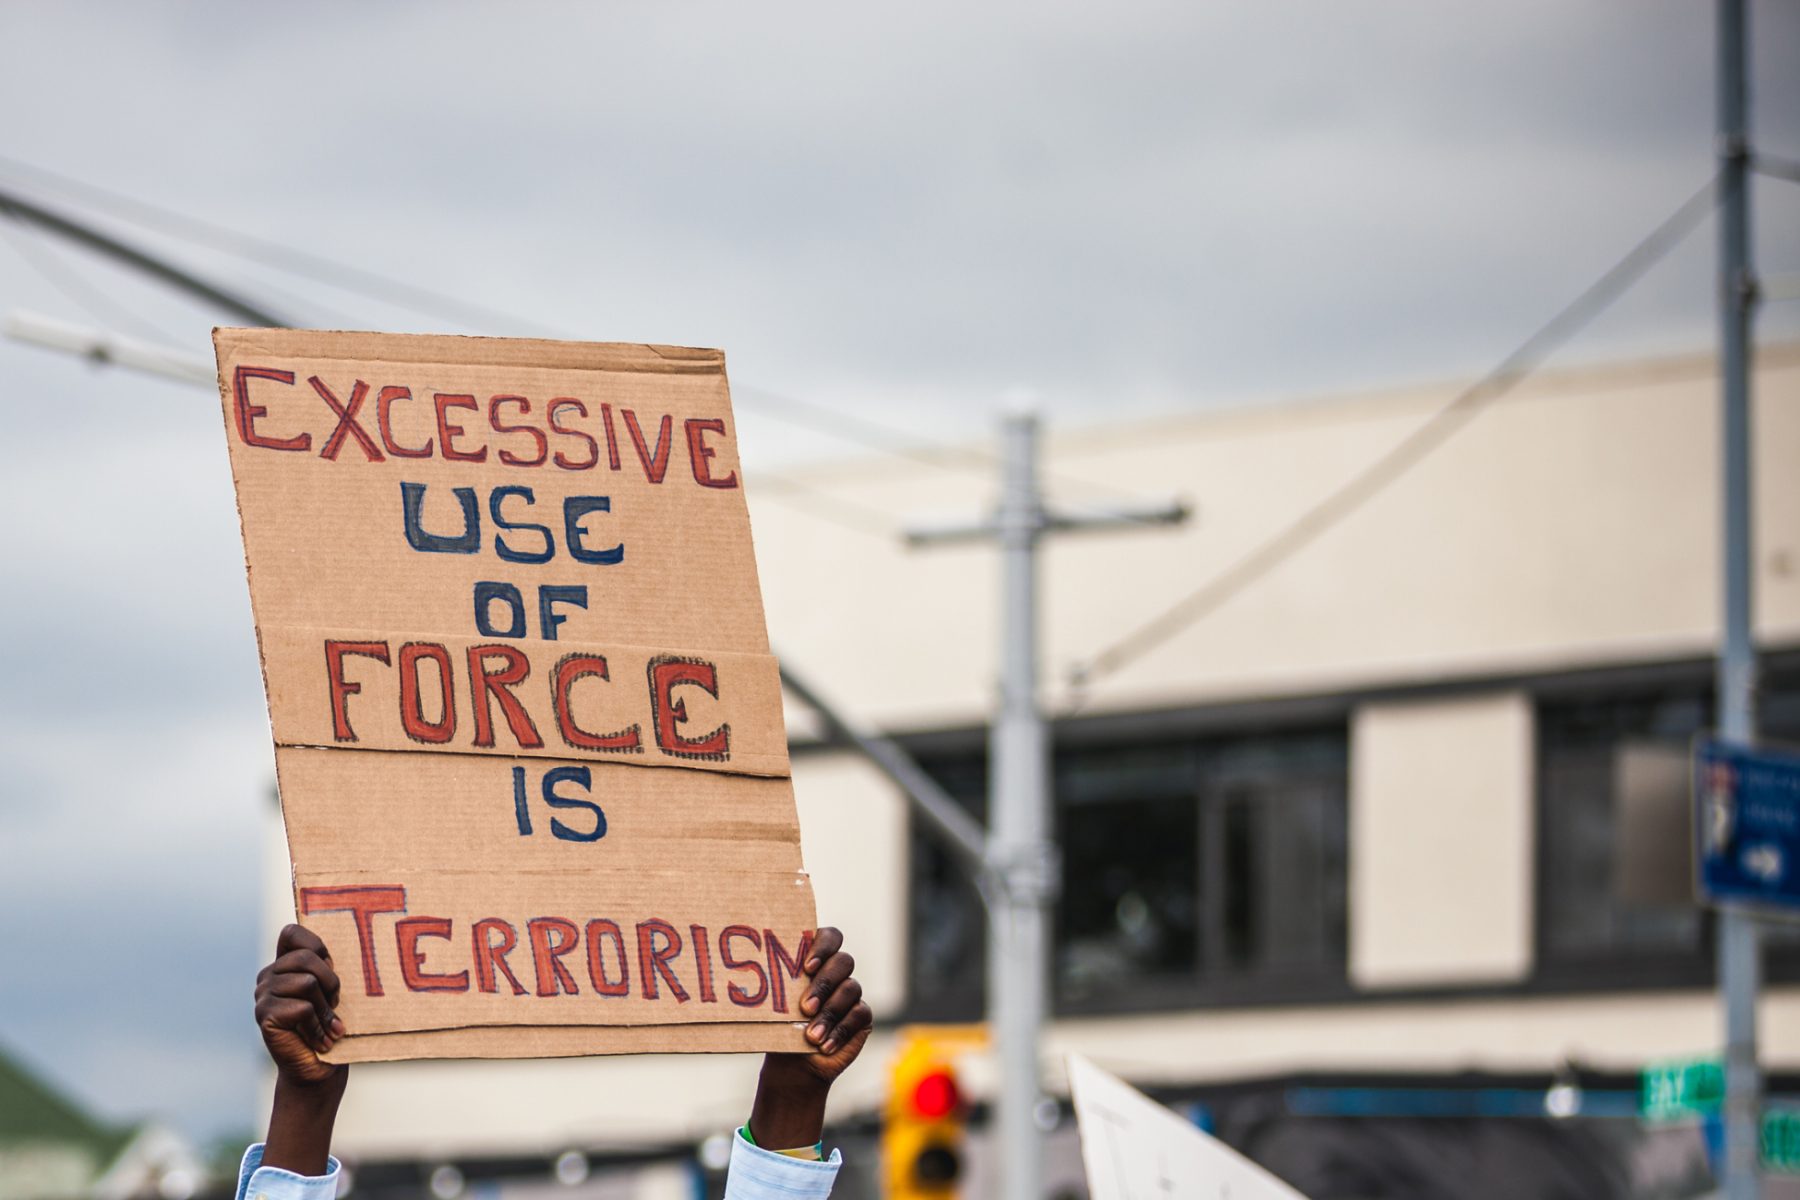 A sign is held up during a civil rights protest that states, “Excessive Use of Force Is Terrorism.”